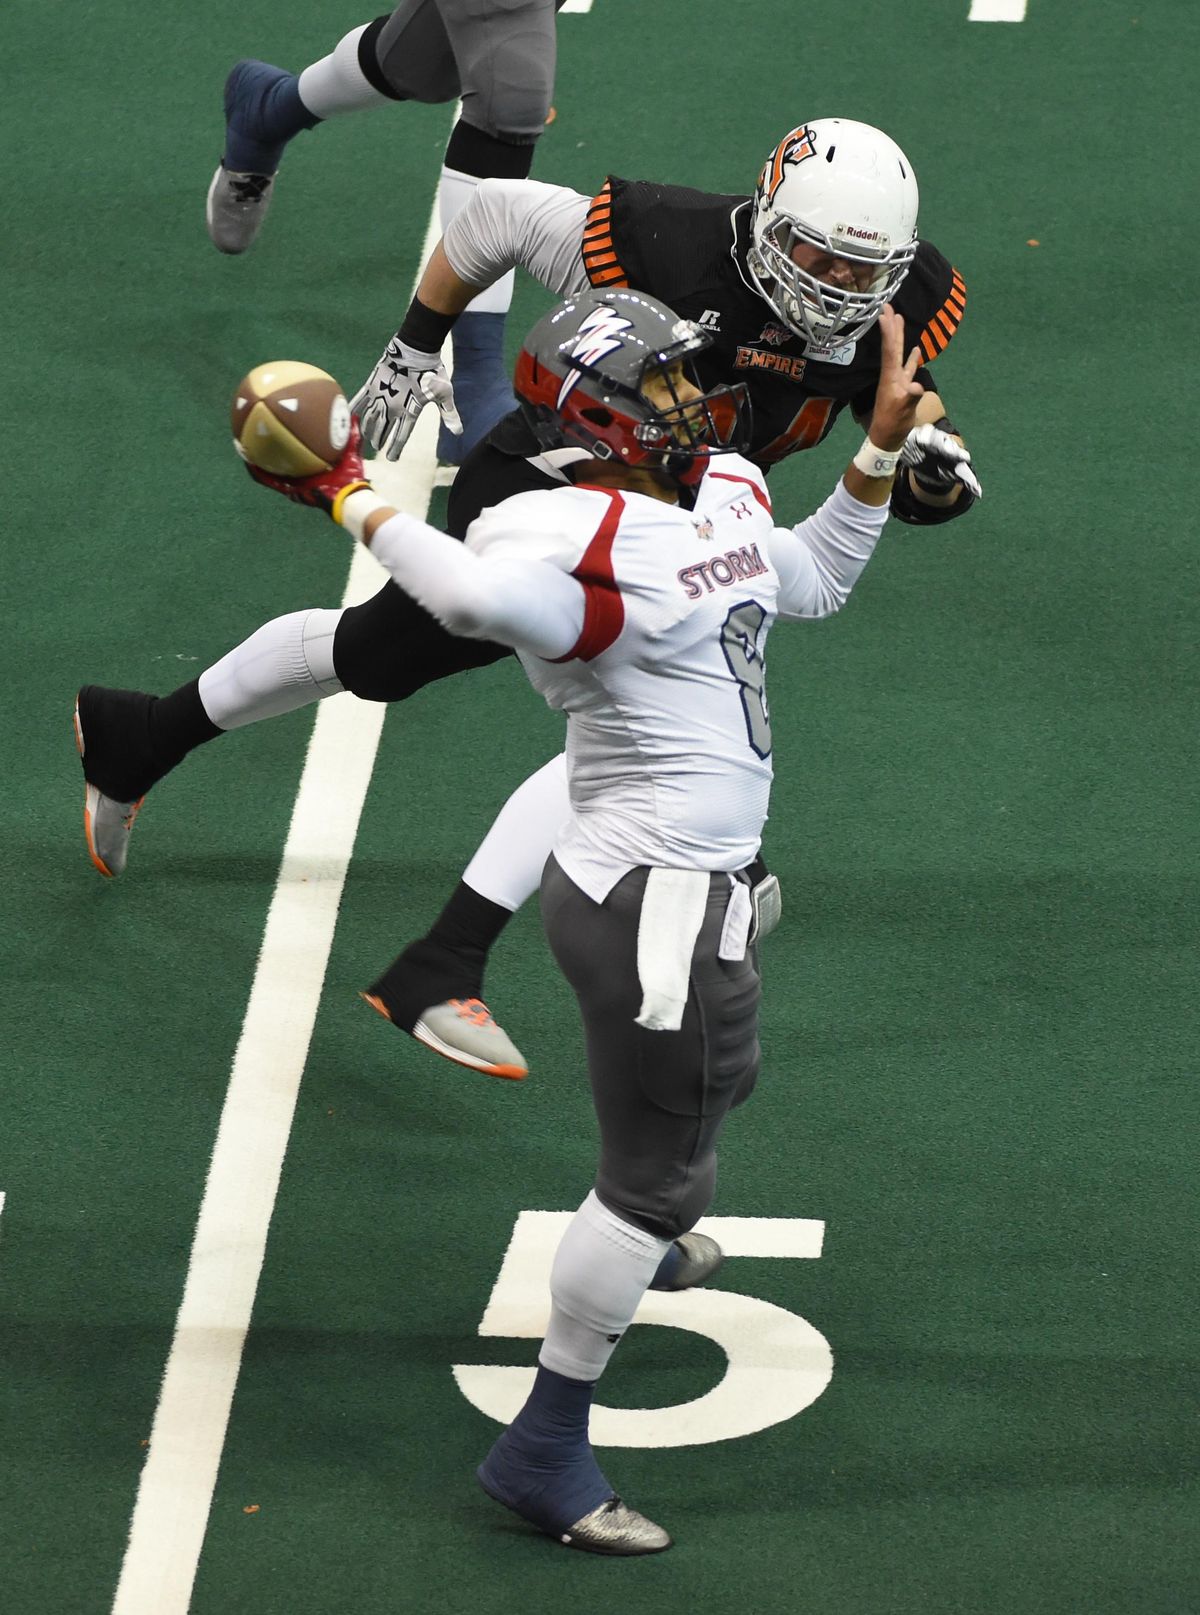 The Empire’s Brett Bowers applied pressure on Sioux Falls quarterback Lorenzo Brown when the teams met last month in Spokane. (Jesse Tinsley / The Spokesman-Review)